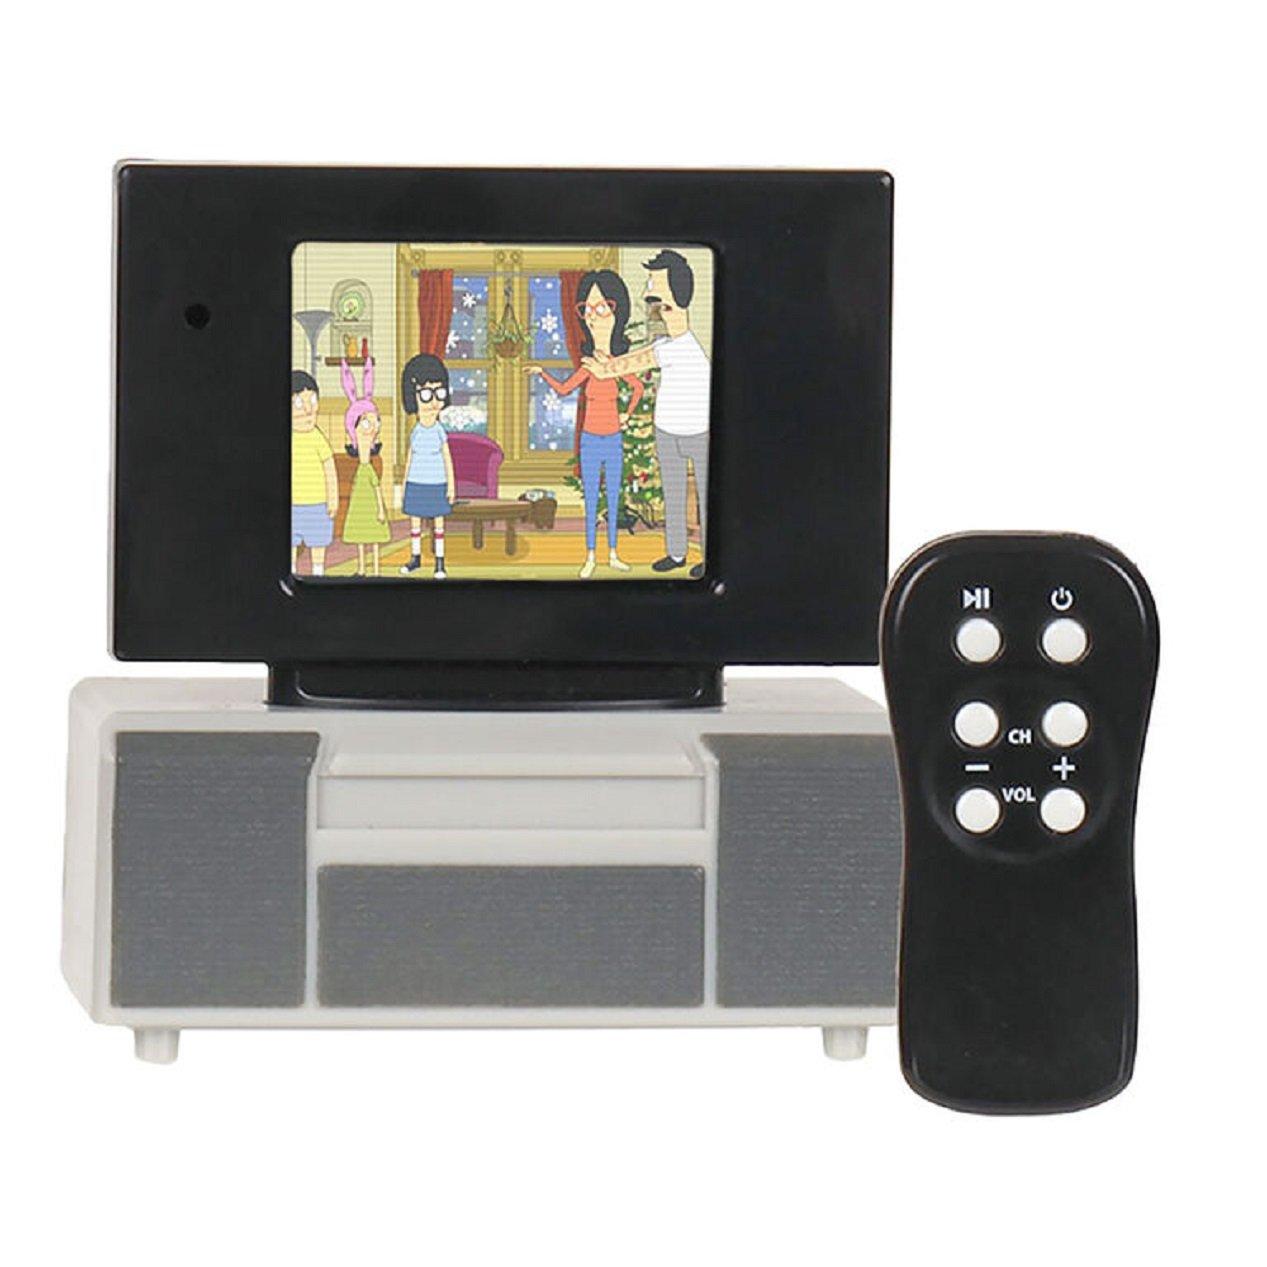 Tiny TV Classics Collectible TV with Real Working Remote 